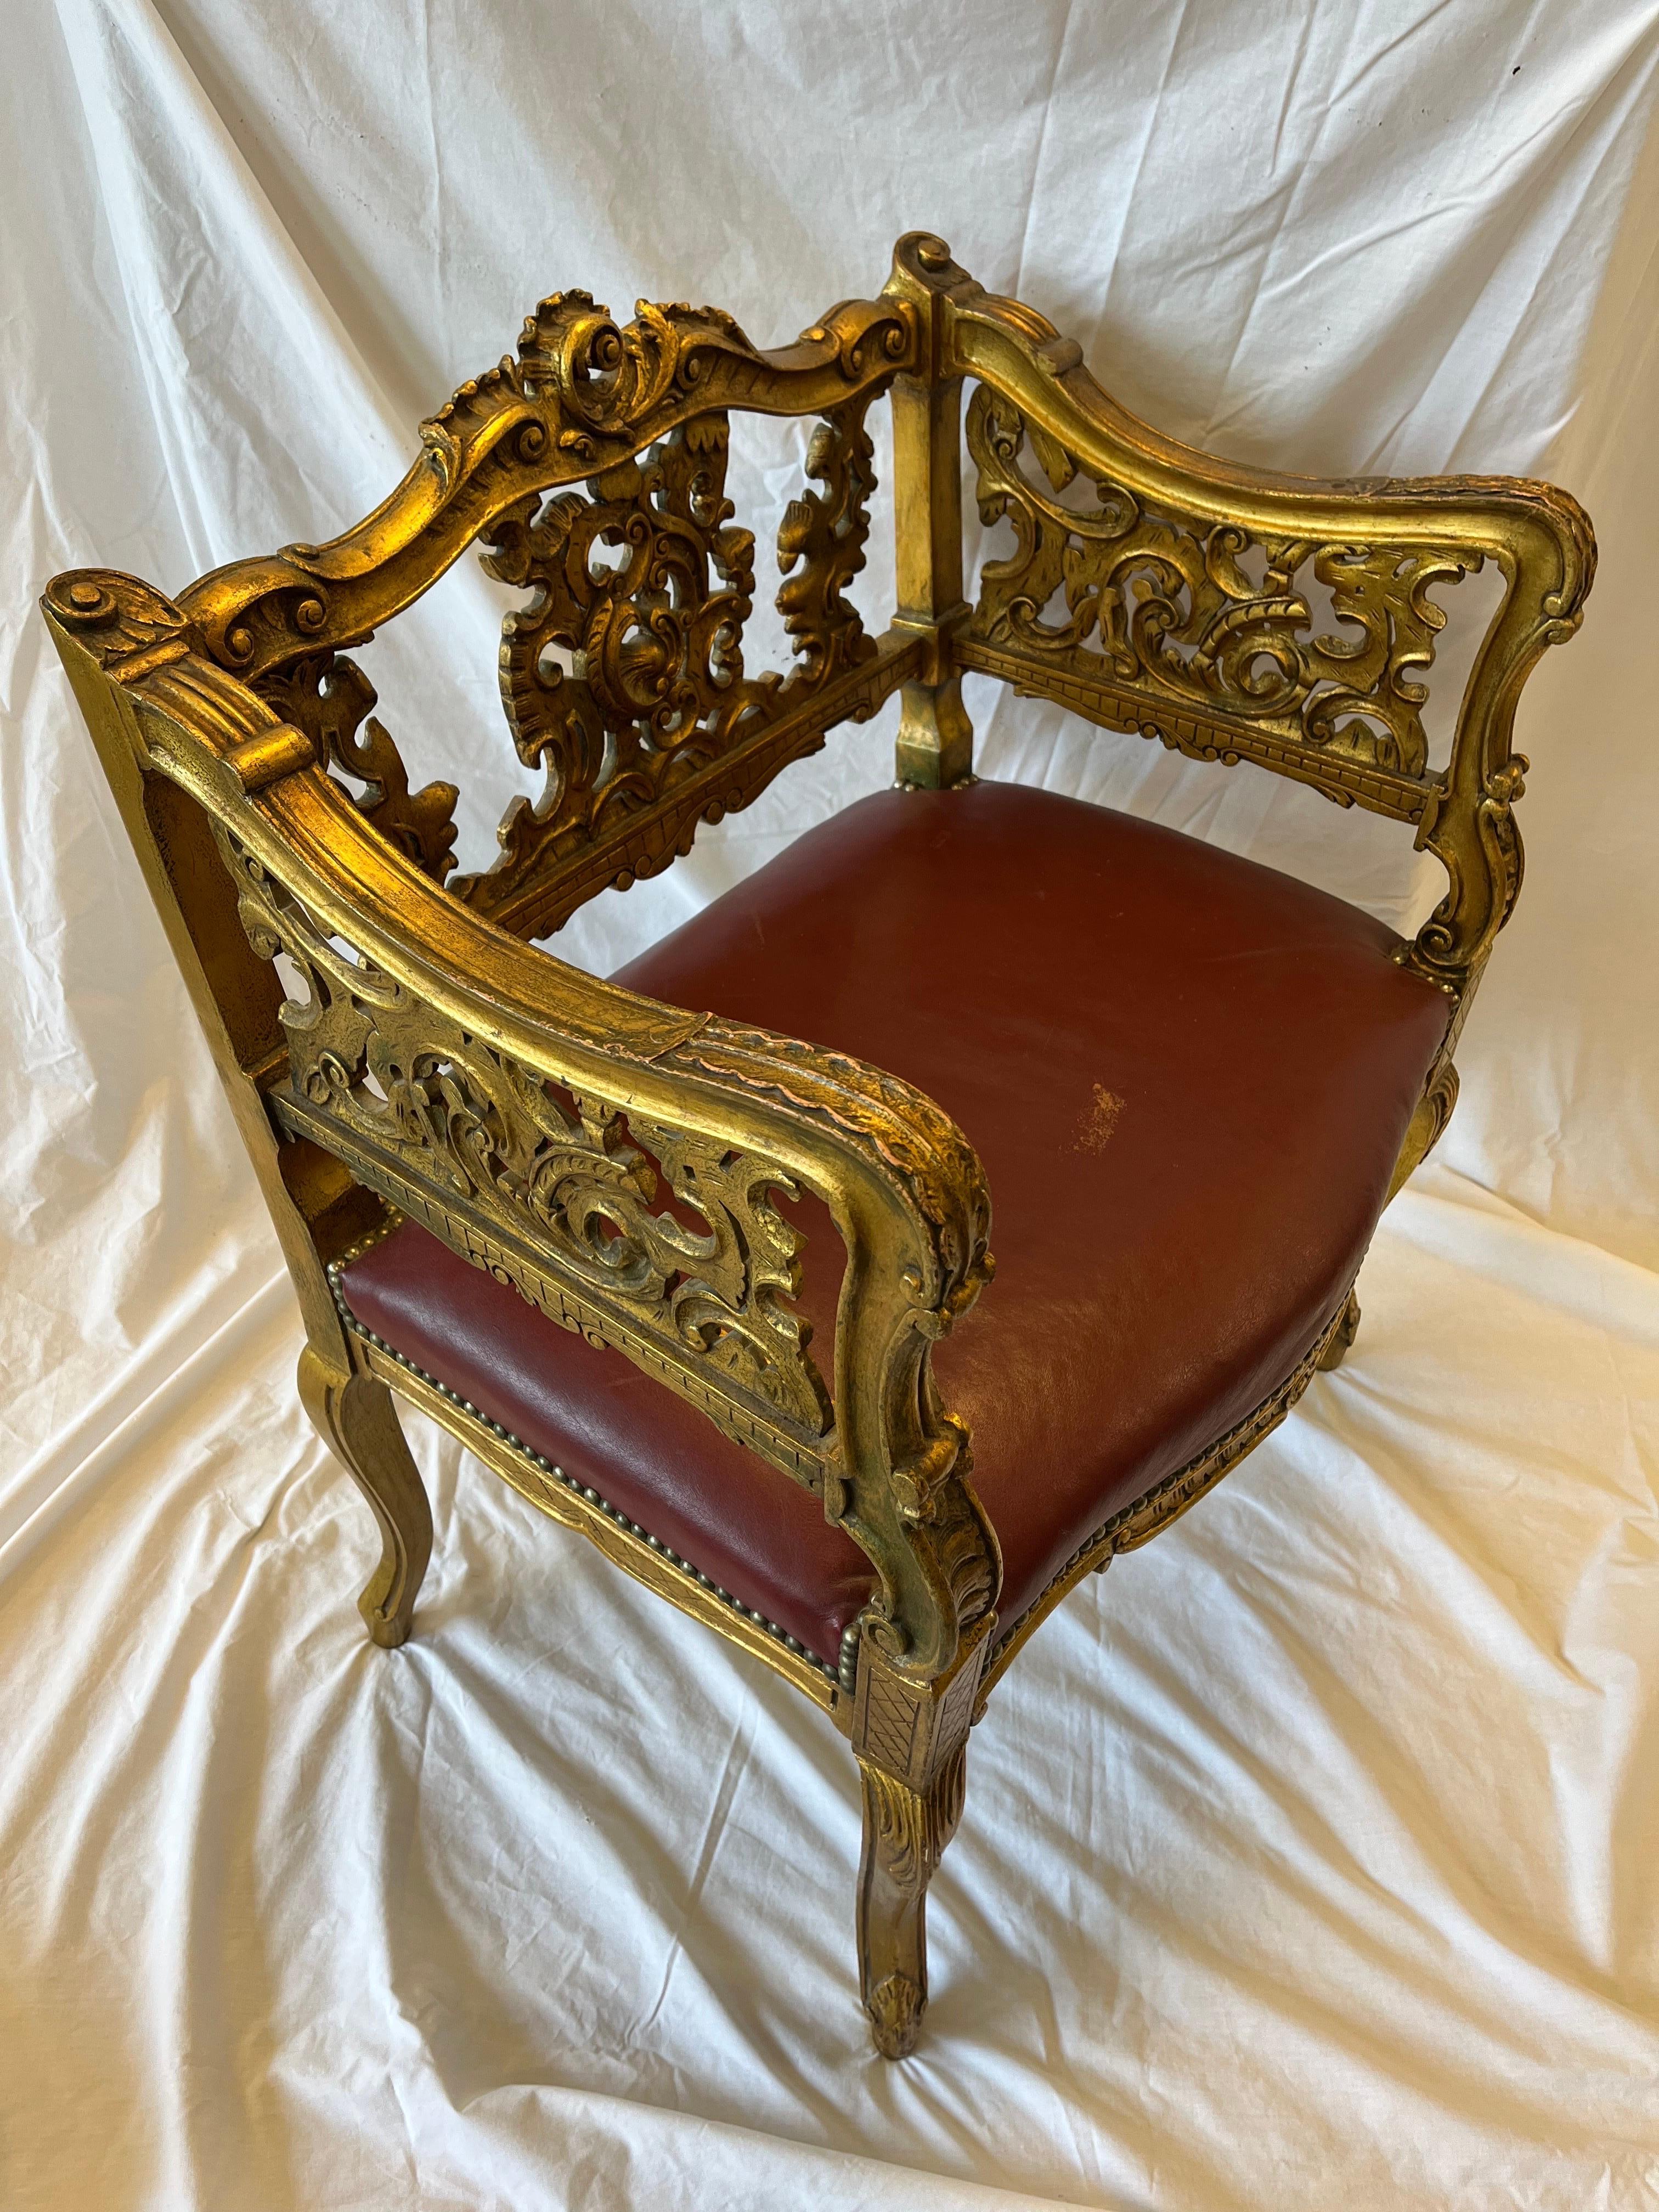 Antique Carved and Gilt Wood Arm Chair Bench Ornate Design Red Upholstered Seat For Sale 2